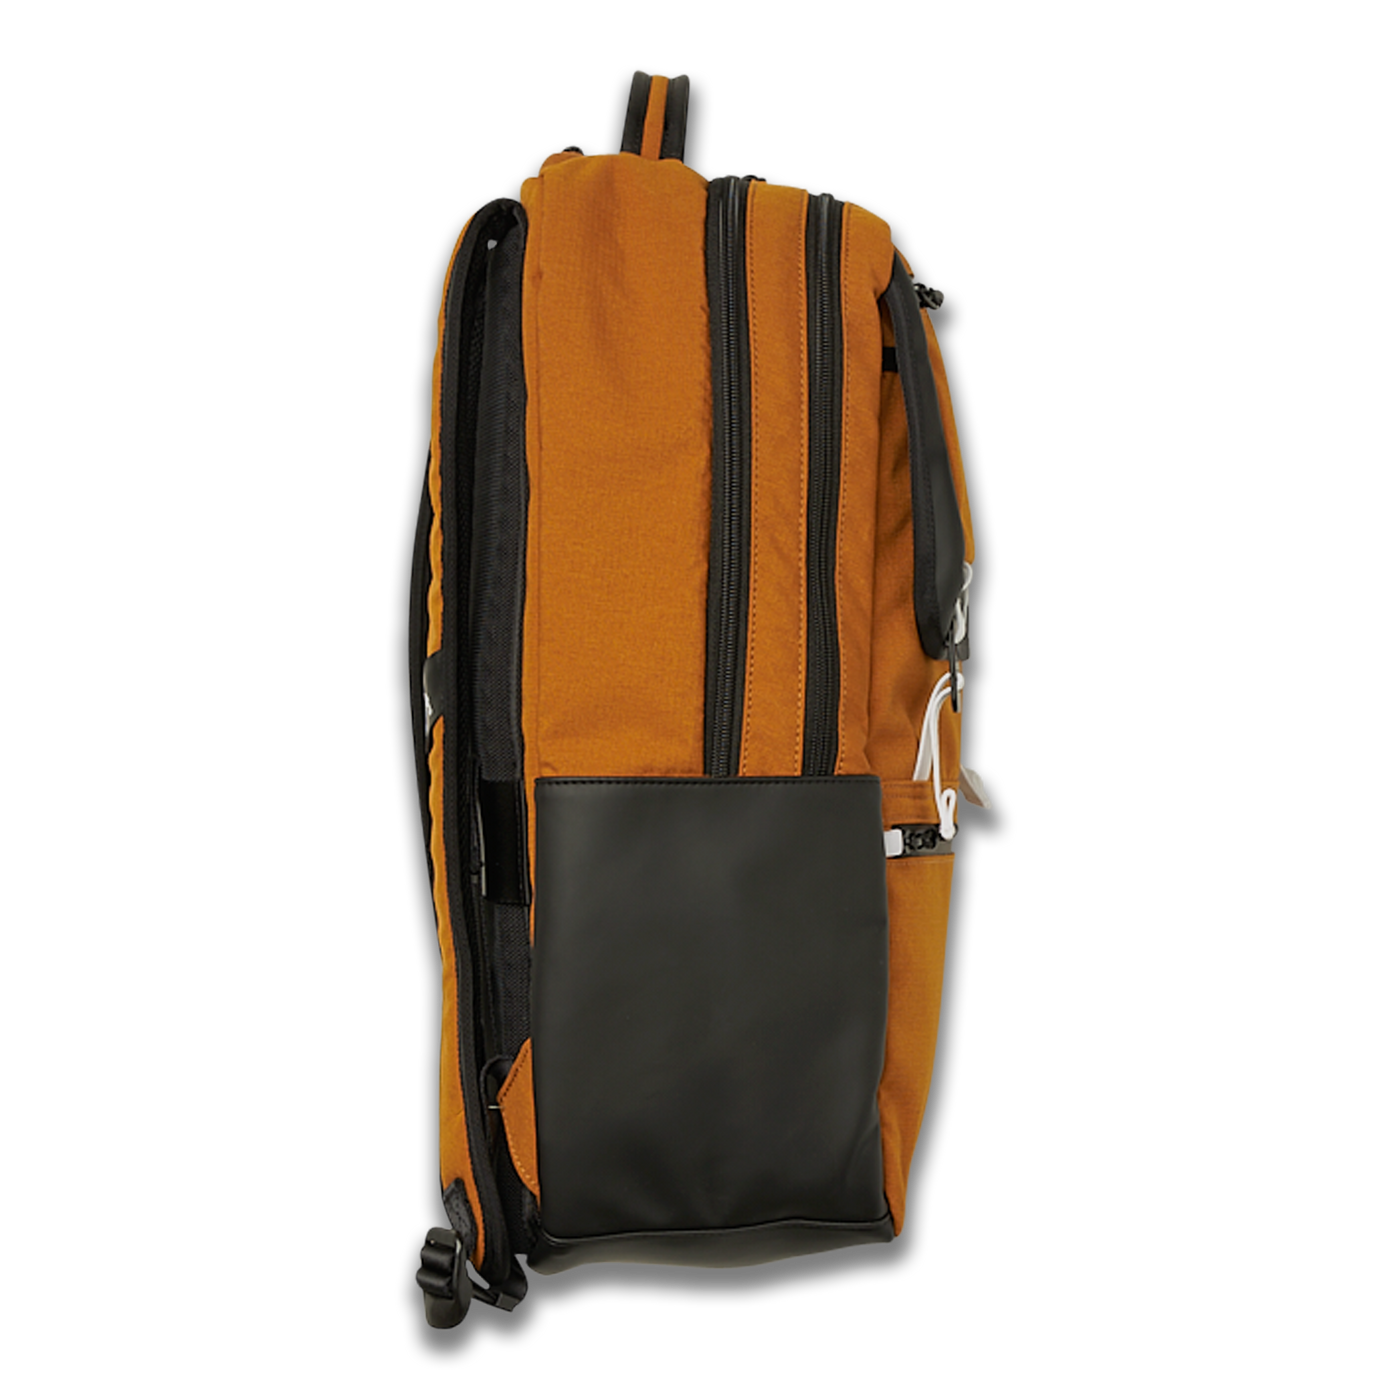 A2 Backpack R - Sienna